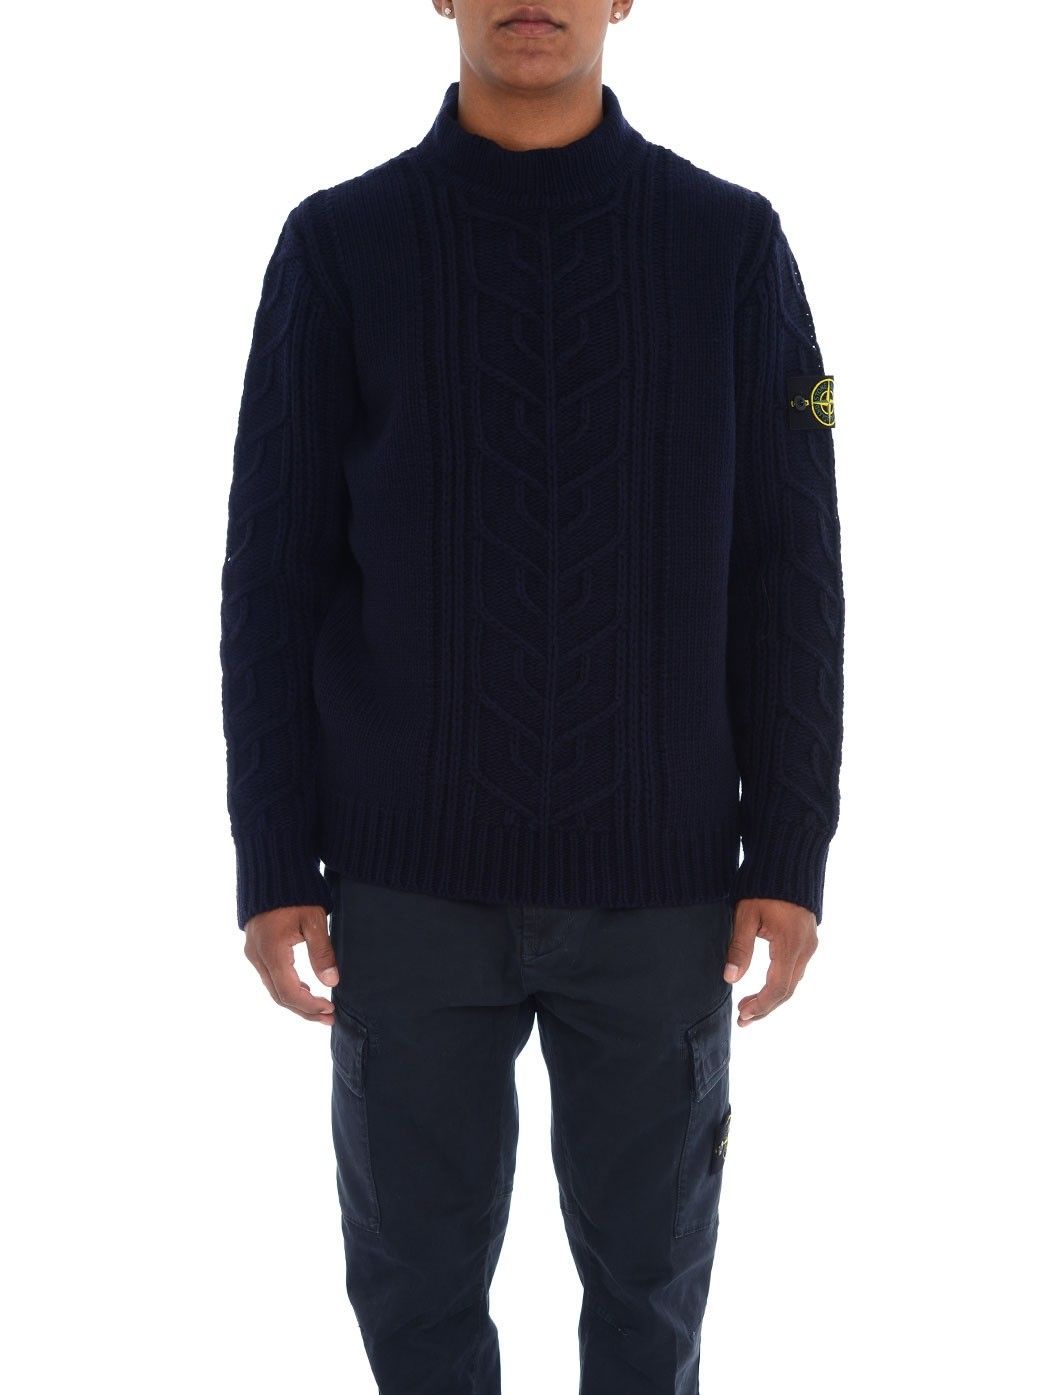  MAN COLLECTION,FALL WINTER,CHURCH'S,MONCLER,MONCLER GRENOBLE,HERNO,WOOLRICH,MSGM,NEIL BARRETT,STONE ISLAND,BLUNDSTONE  STONE ISLAND 7515569D4